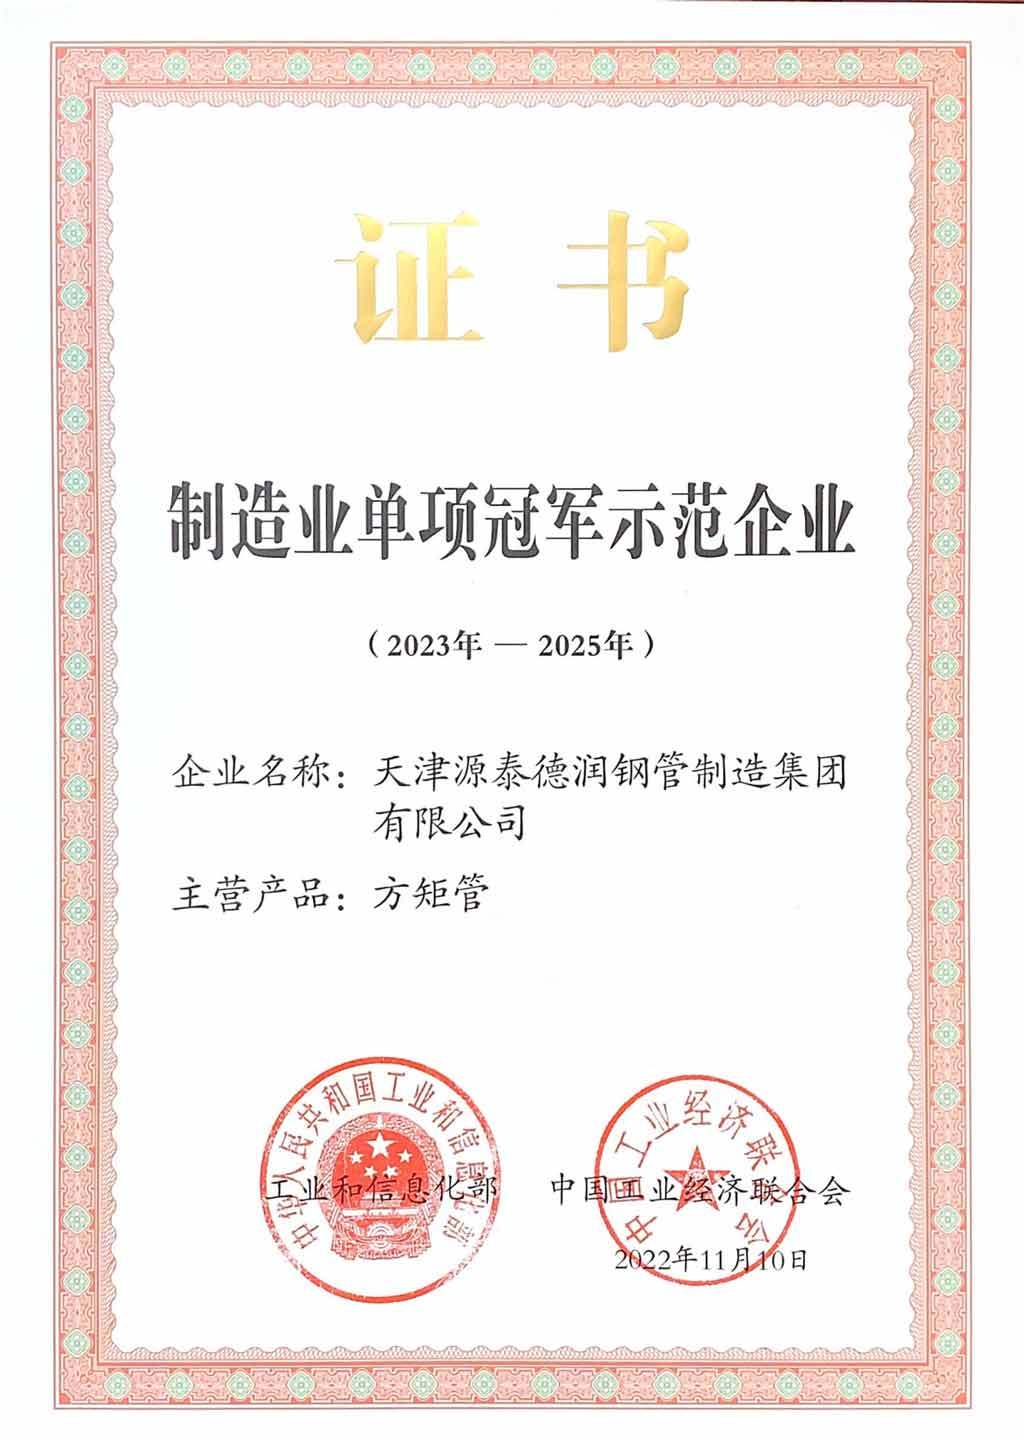 Tianjin Yuantai Derun Steel Pipe Manufacturing Group was awarded as a national level single champion demonstration enterprise in the manufacturing industry